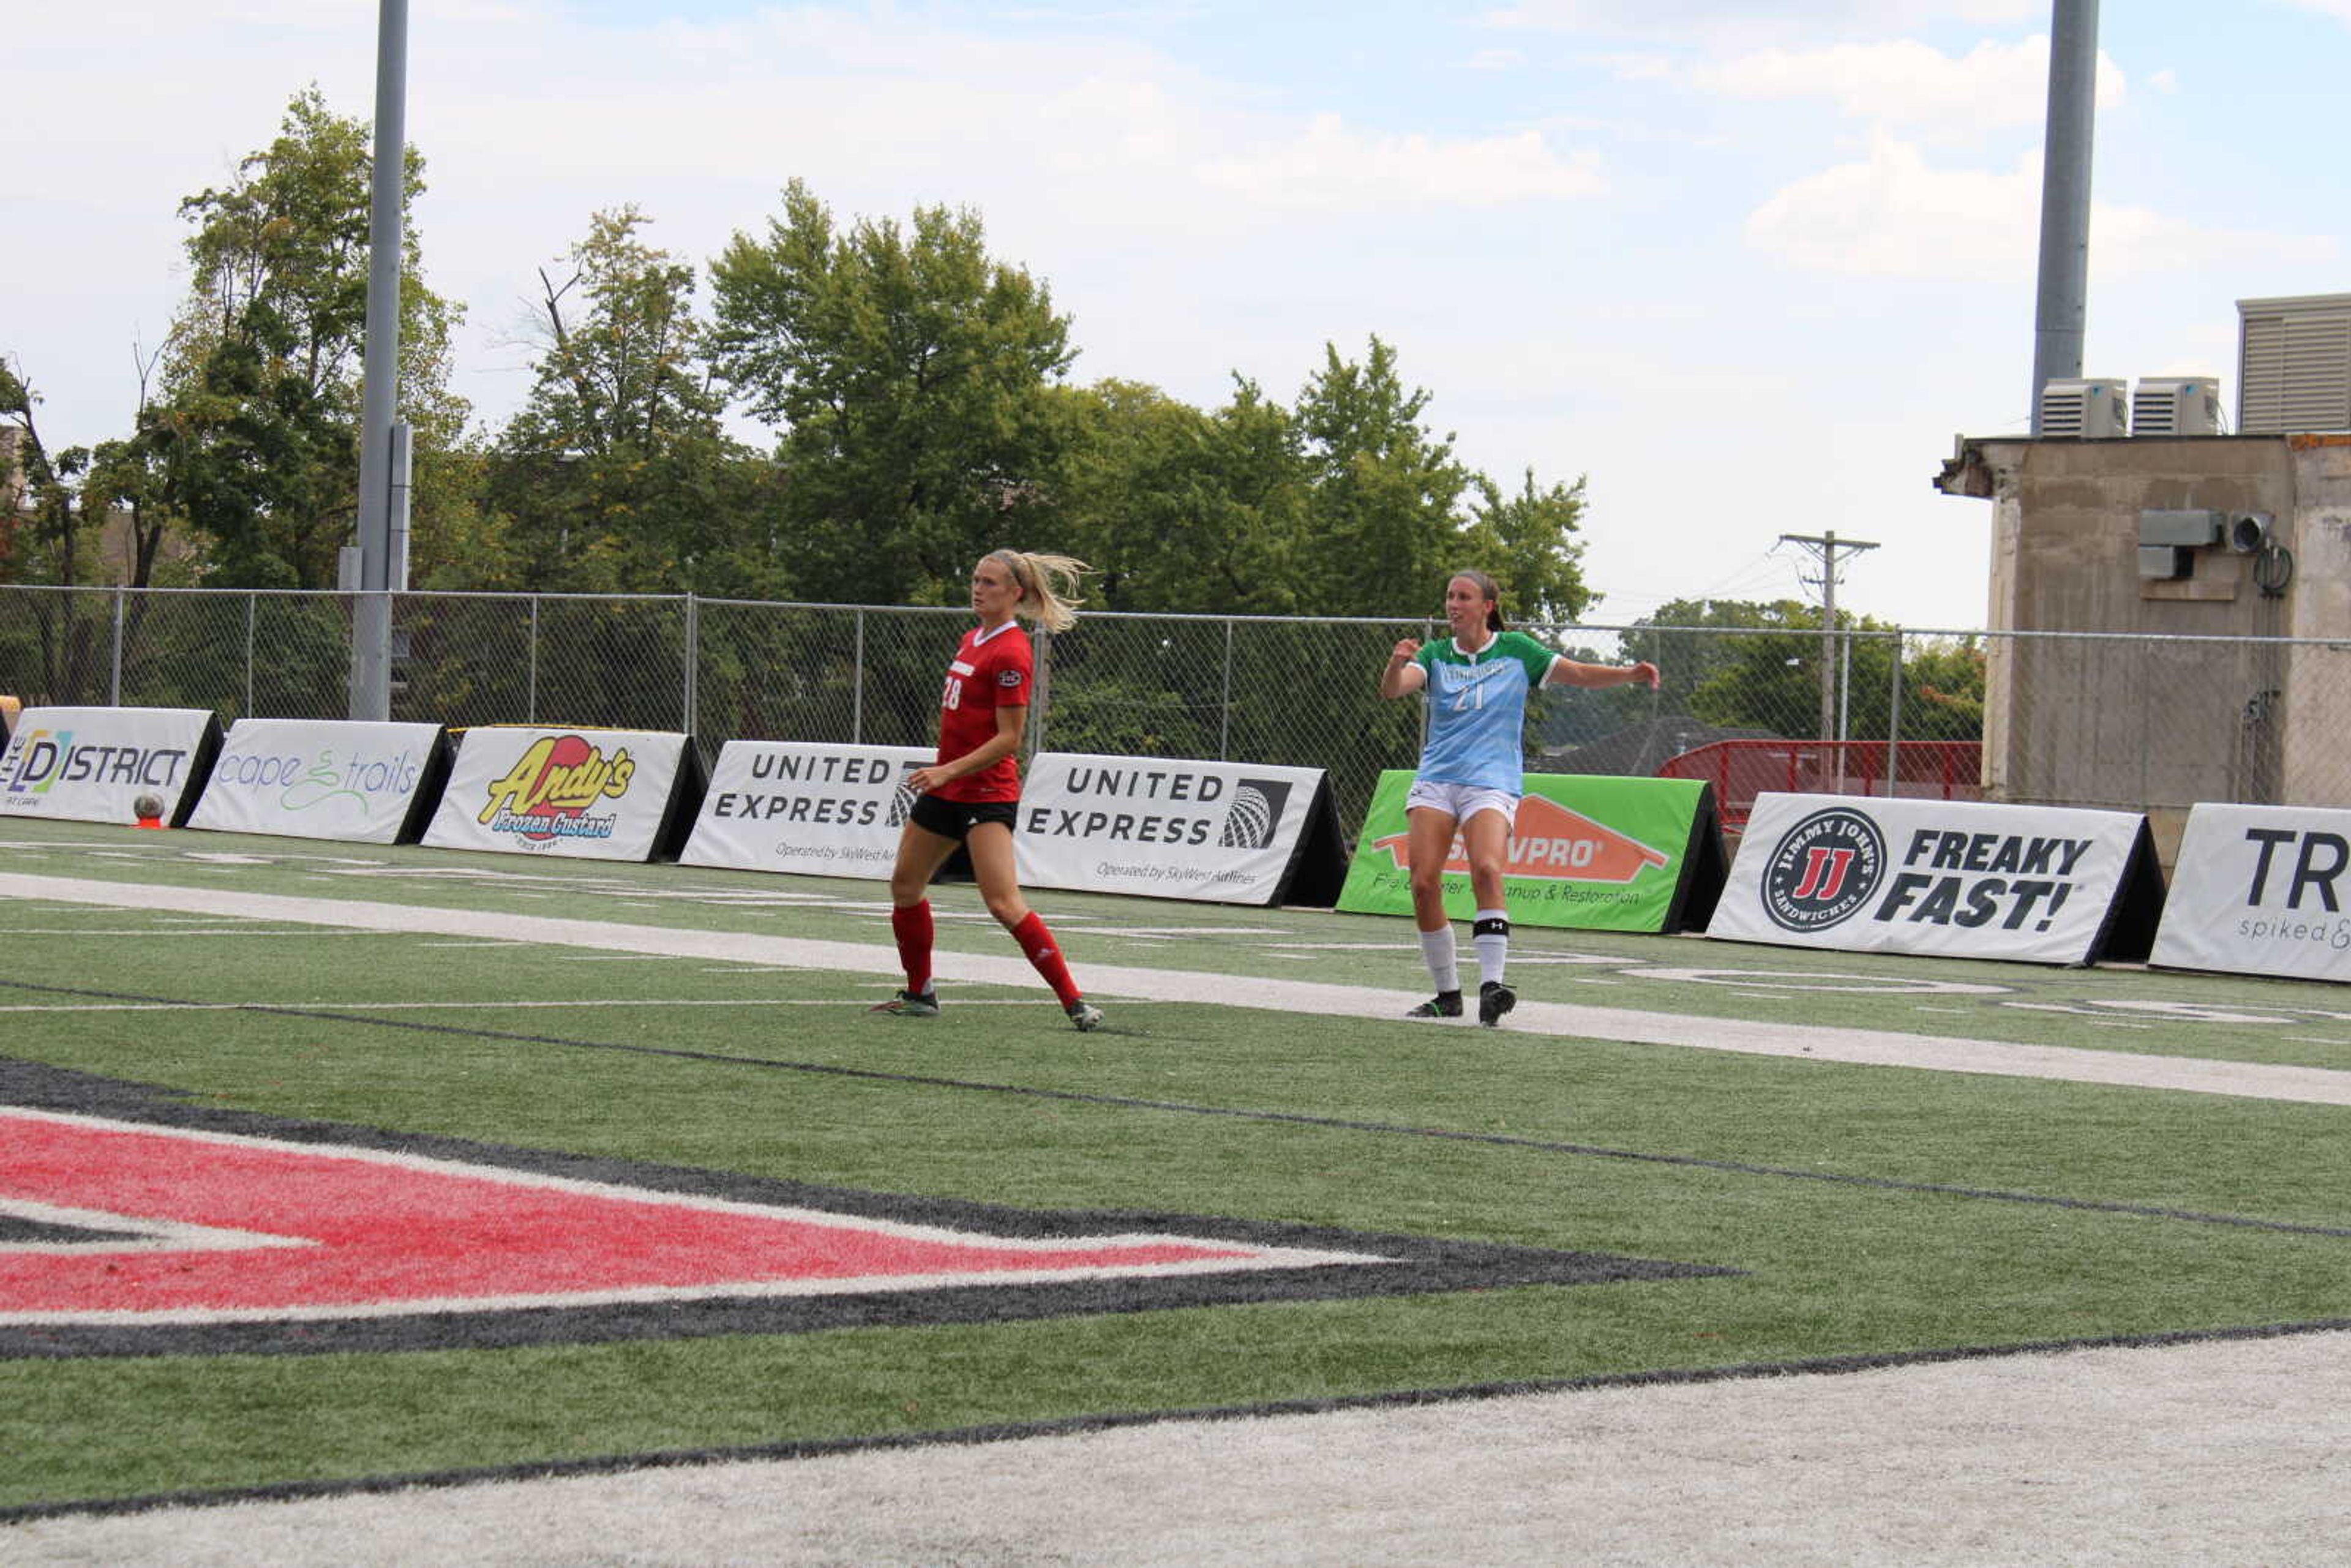 Redhawks sophomore Elizabeth Rater (21) and SIUE junior Sarah Magnoni (28) during the match on Sunday, Sept 18. at Houck Stadium.